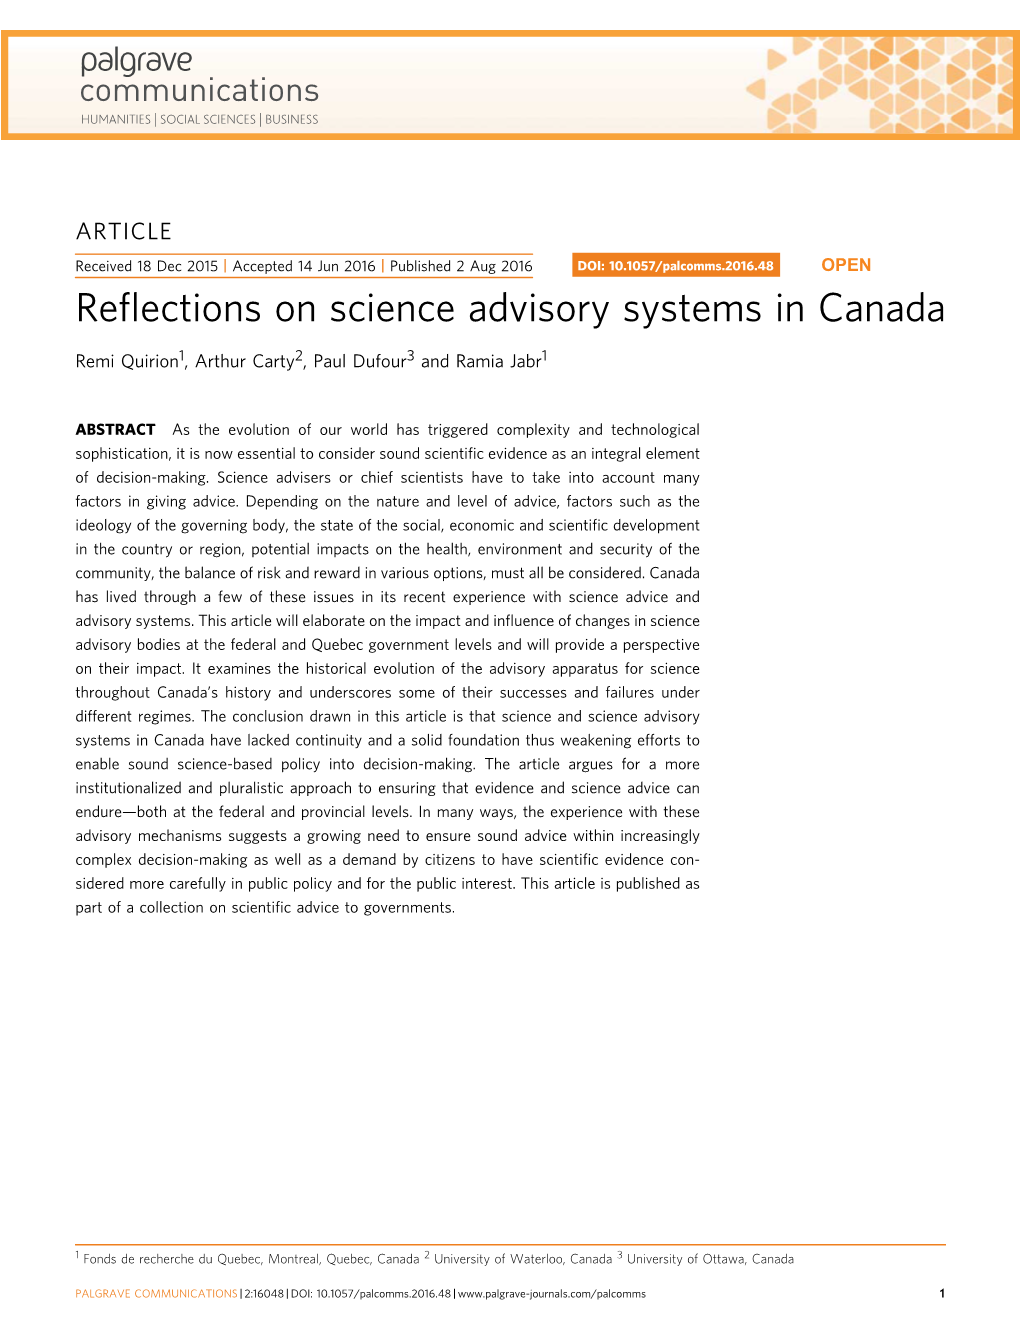 Reflections on Science Advisory Systems in Canada